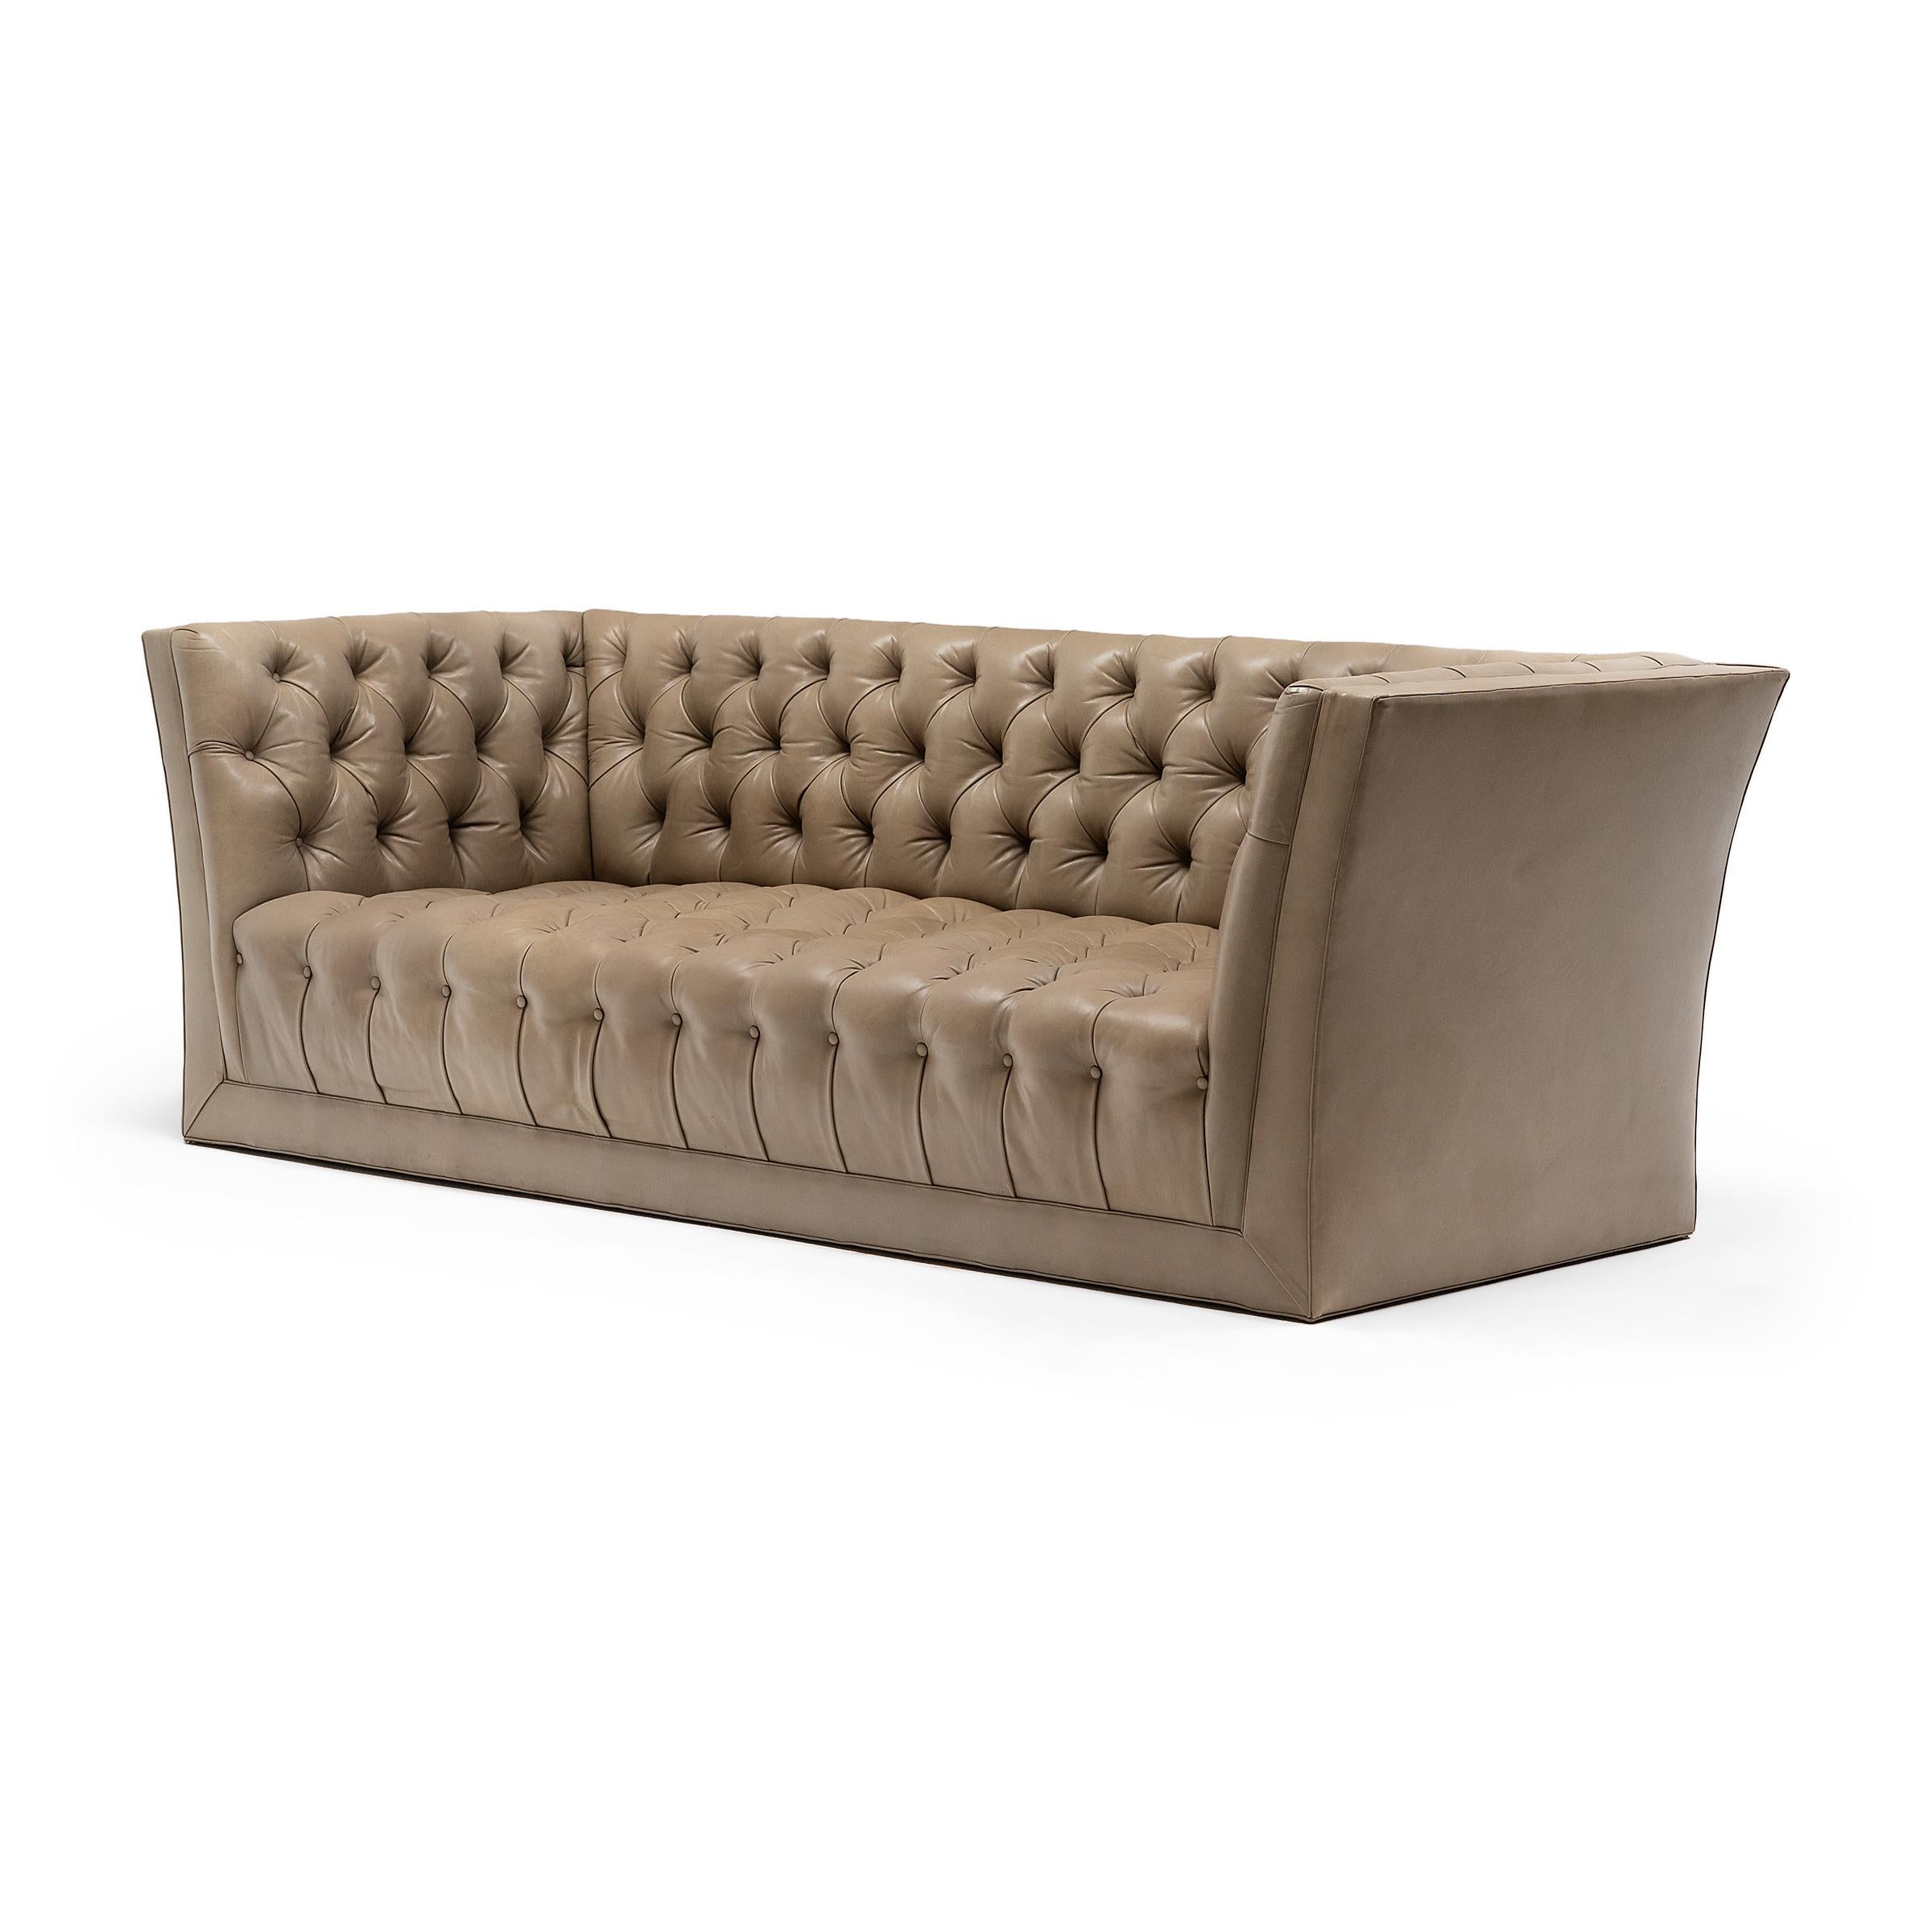 This statement leather sofa reinvents MCM designs with fine materials and a neutral palette. The low sofa is upholstered in a lush Napa leather with pale taupe color and a wonderfully soft texture. Crafted in the style of mid-century modern, the